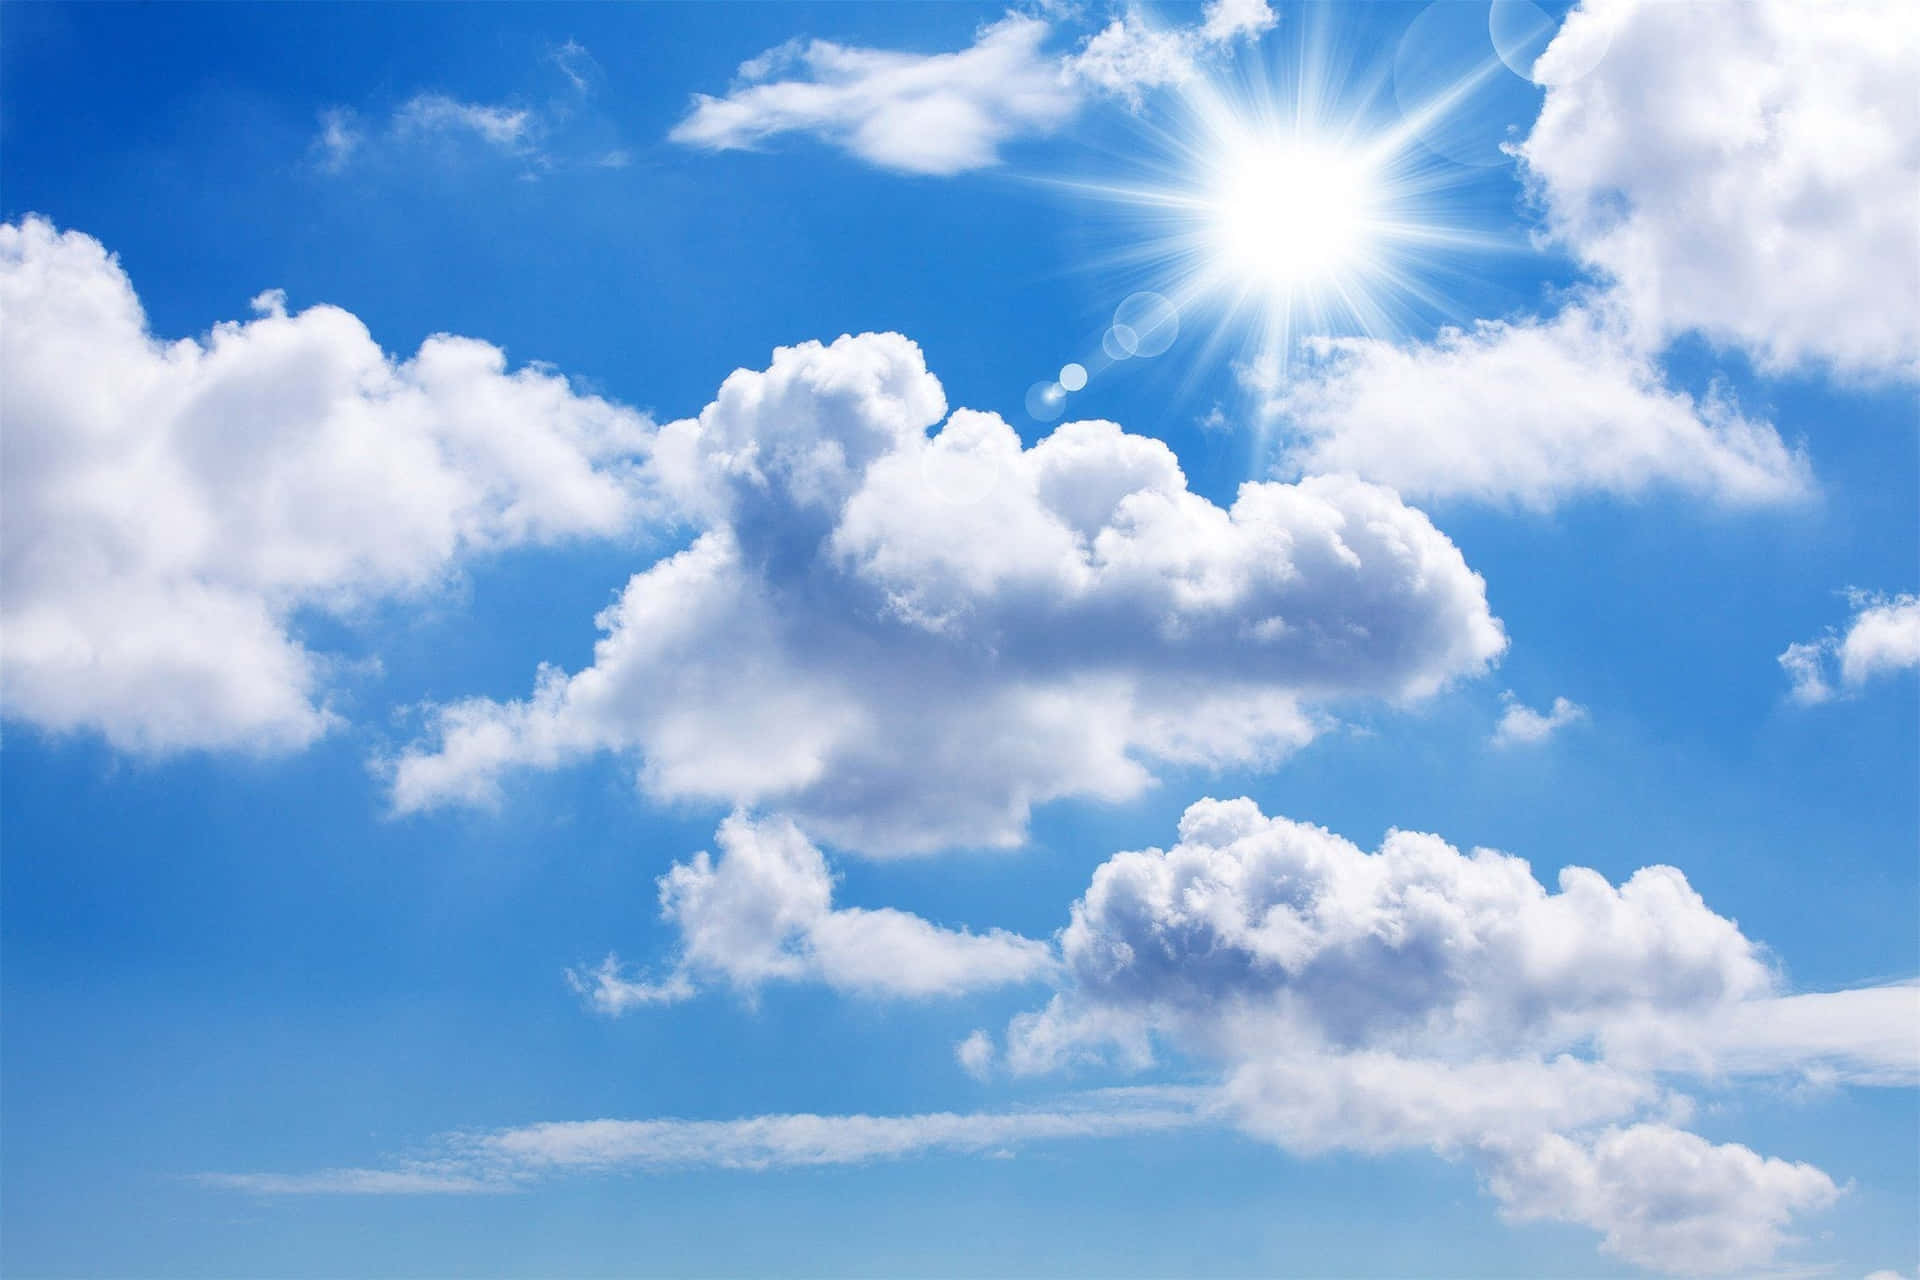 Enjoy an idyllic view of white clouds against a blue sky Wallpaper